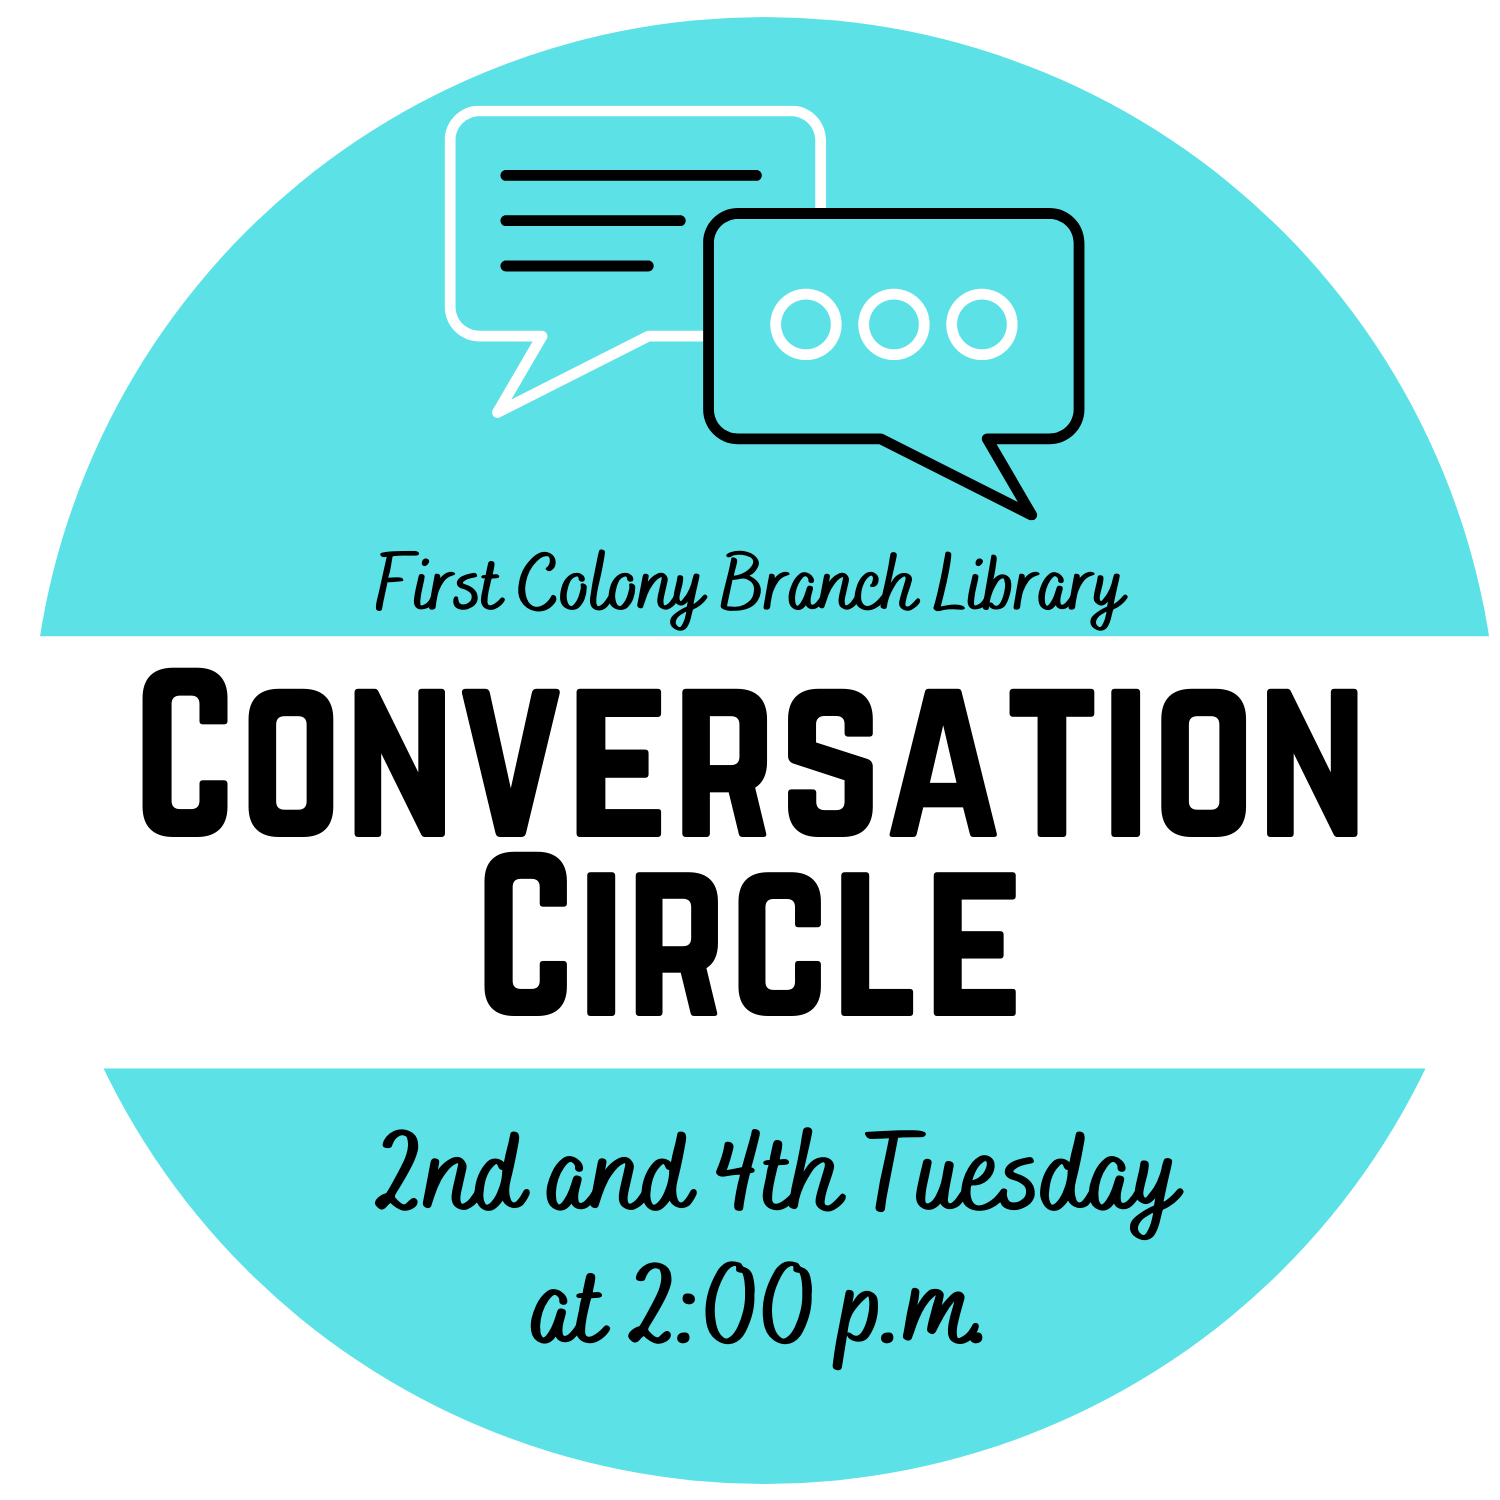 Teal circle with "Conversation Circle" text in white bar